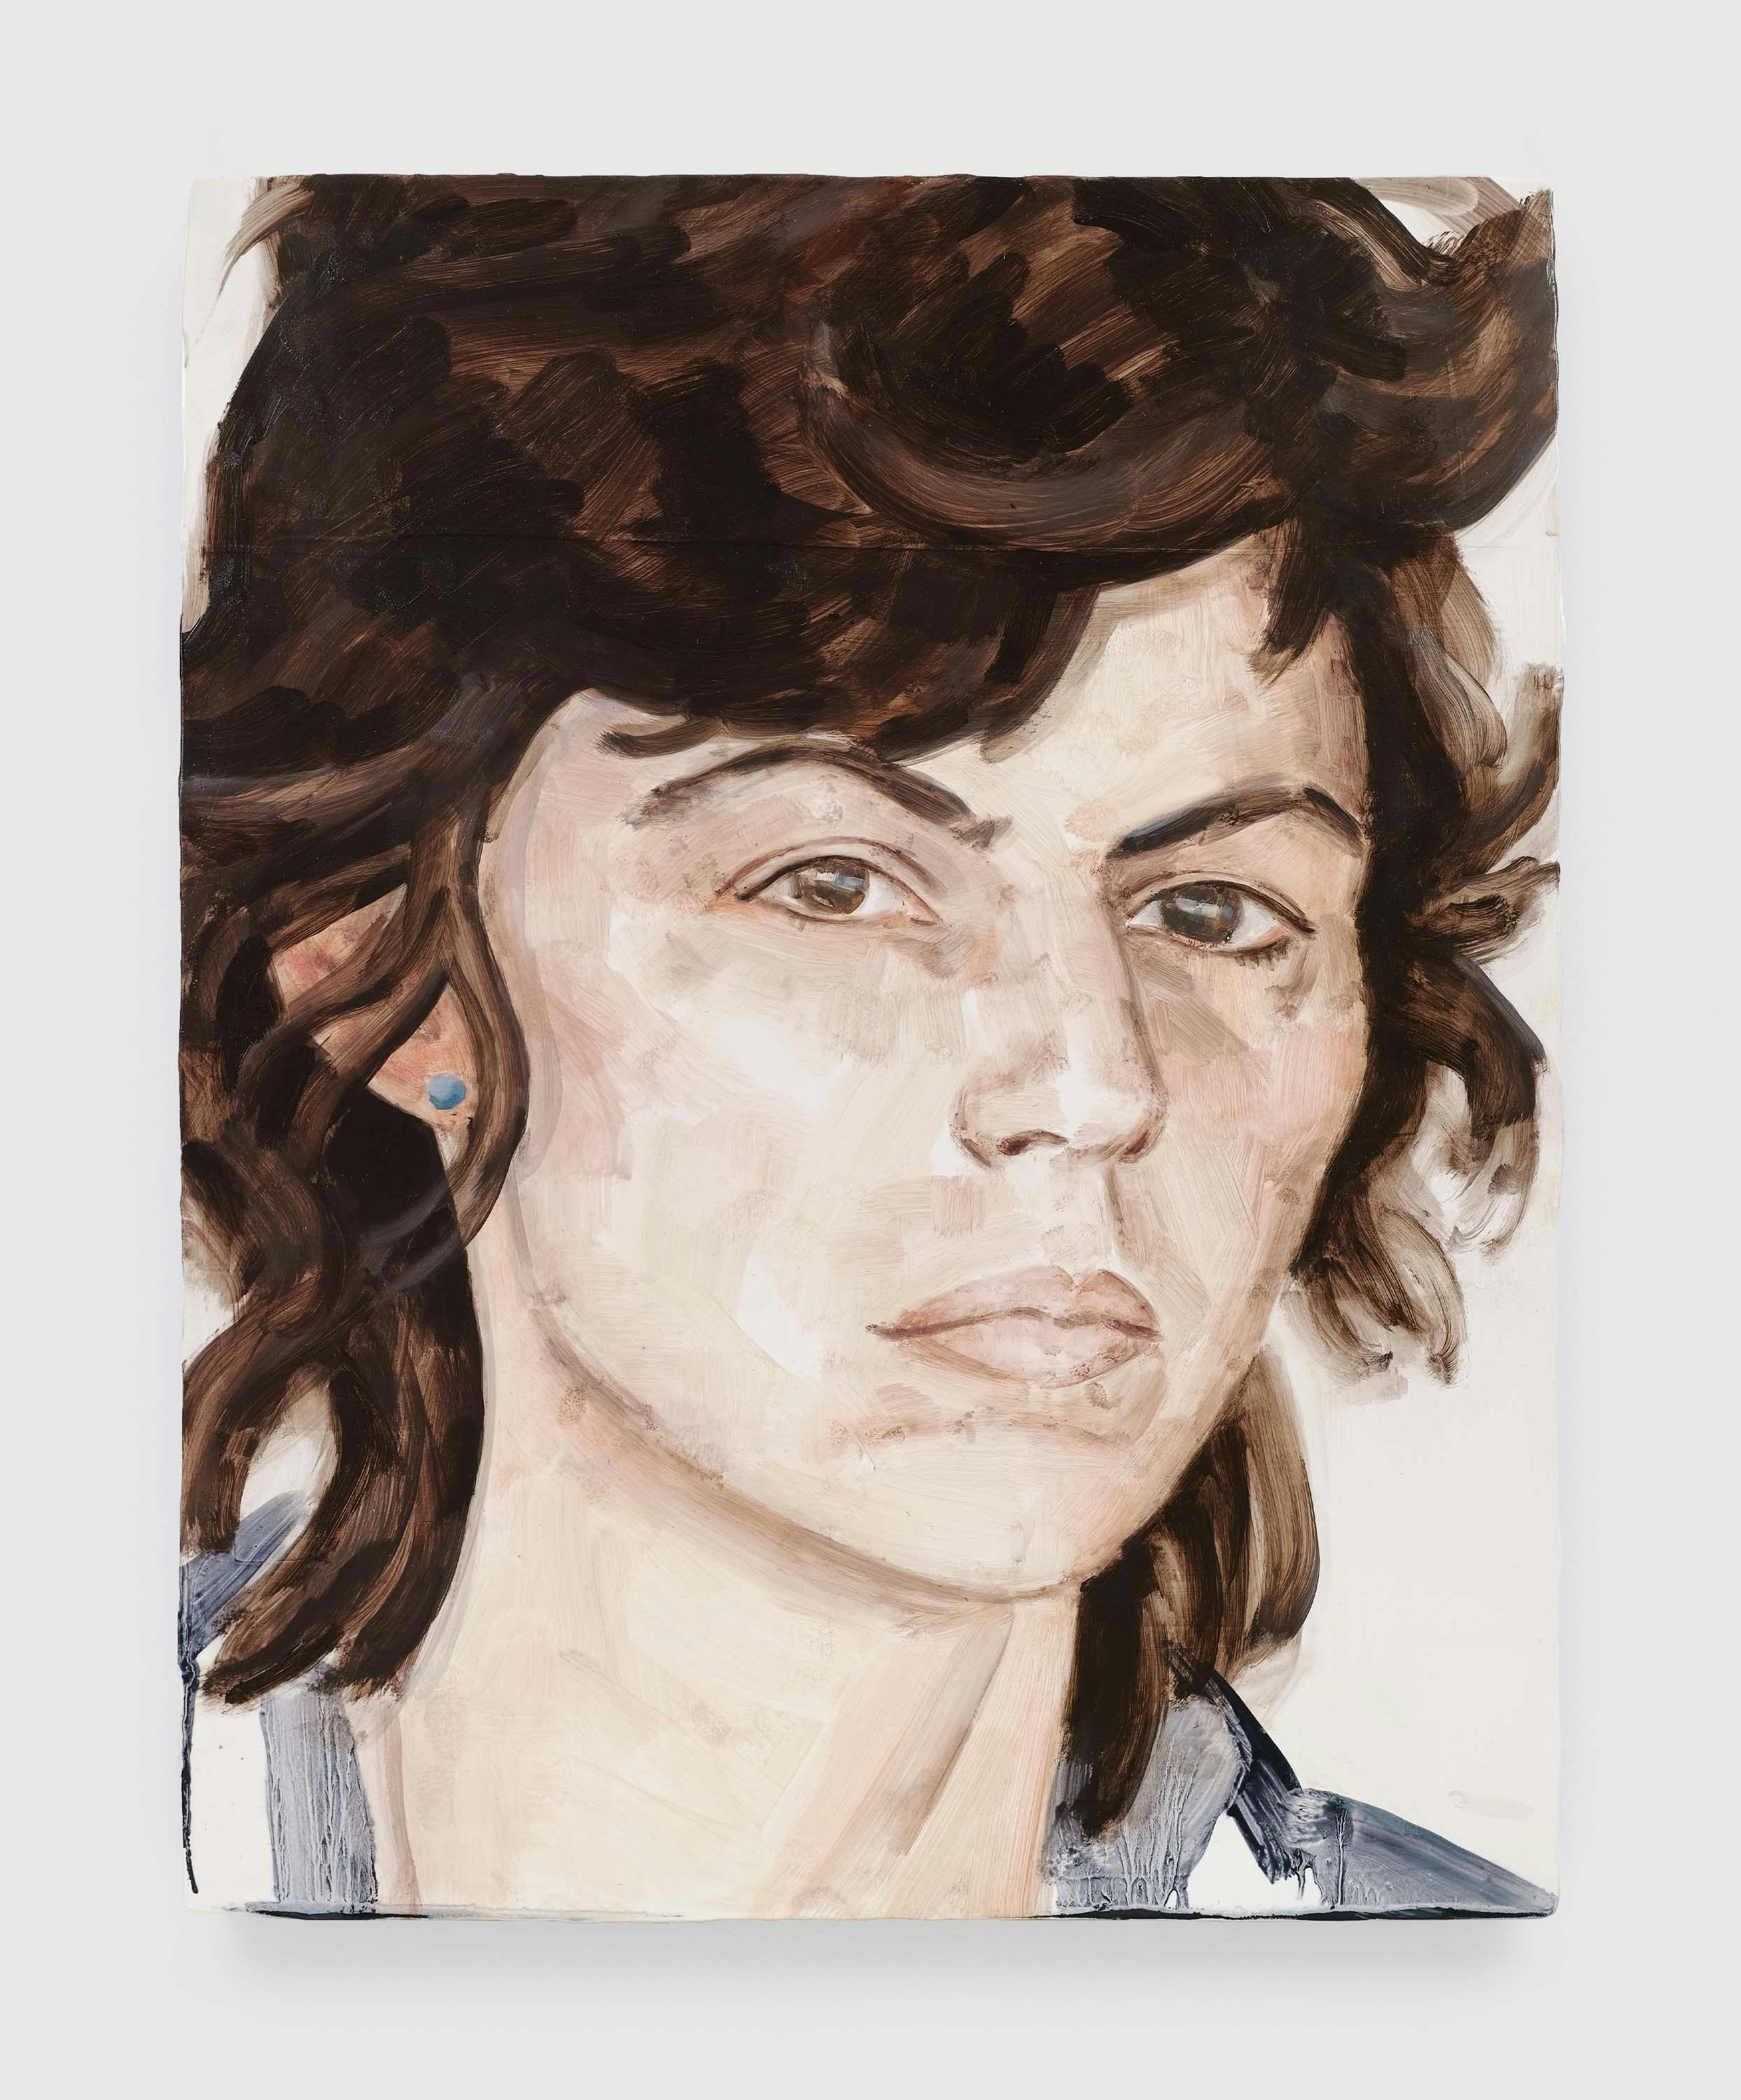 A painting by Elizabeth Peyton, titled Isa Genzken, 1980, dated 2010.